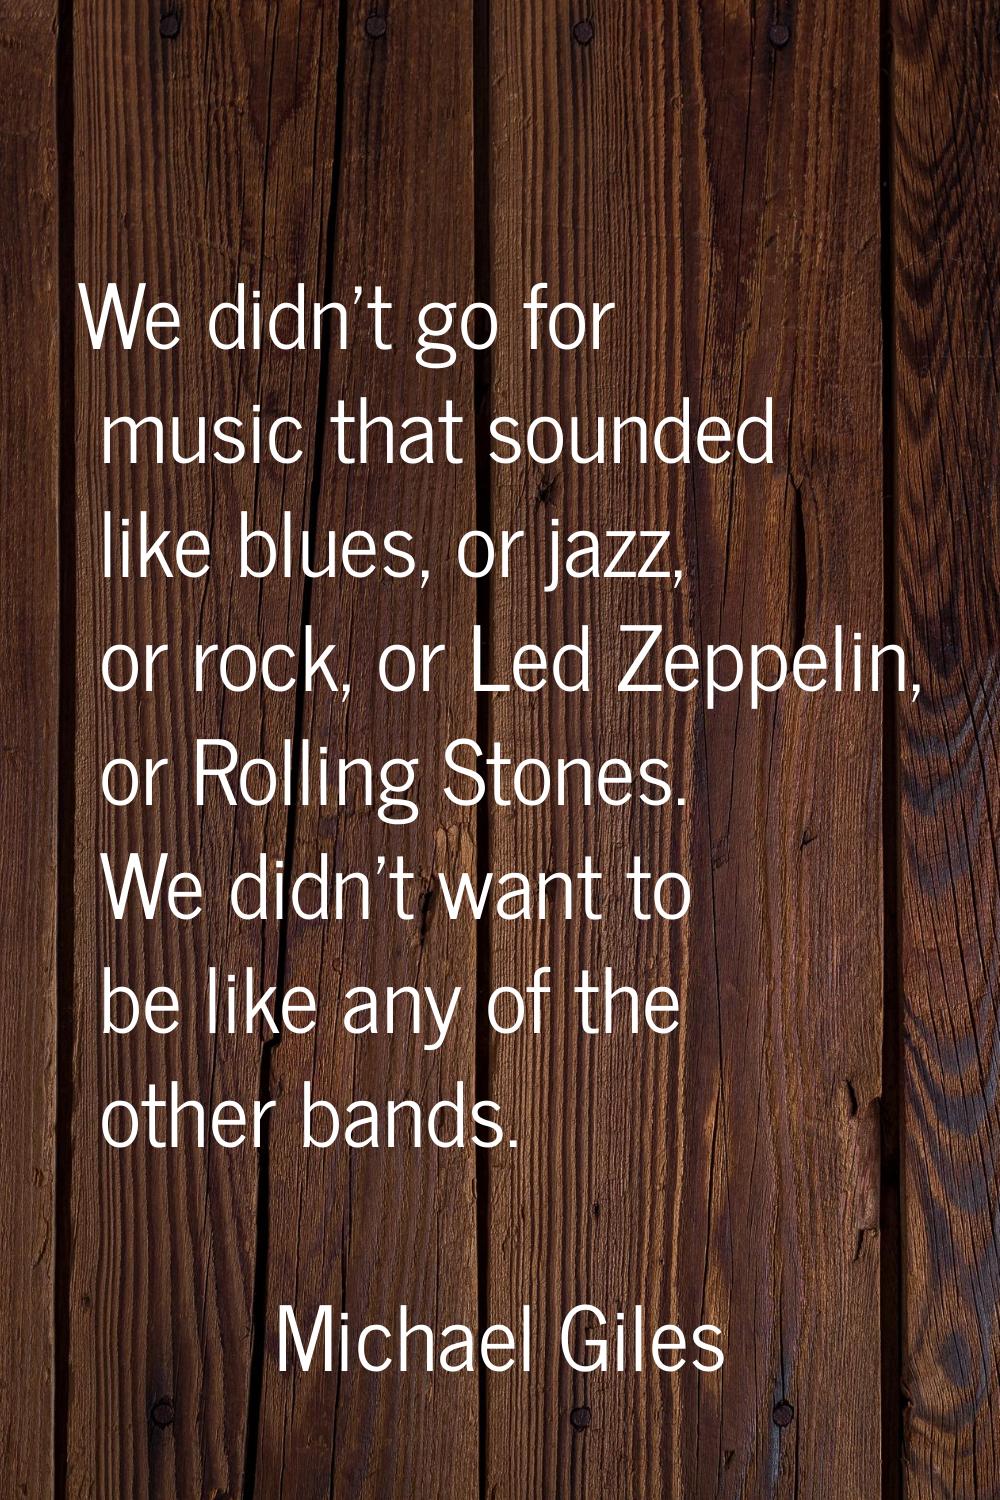 We didn't go for music that sounded like blues, or jazz, or rock, or Led Zeppelin, or Rolling Stone